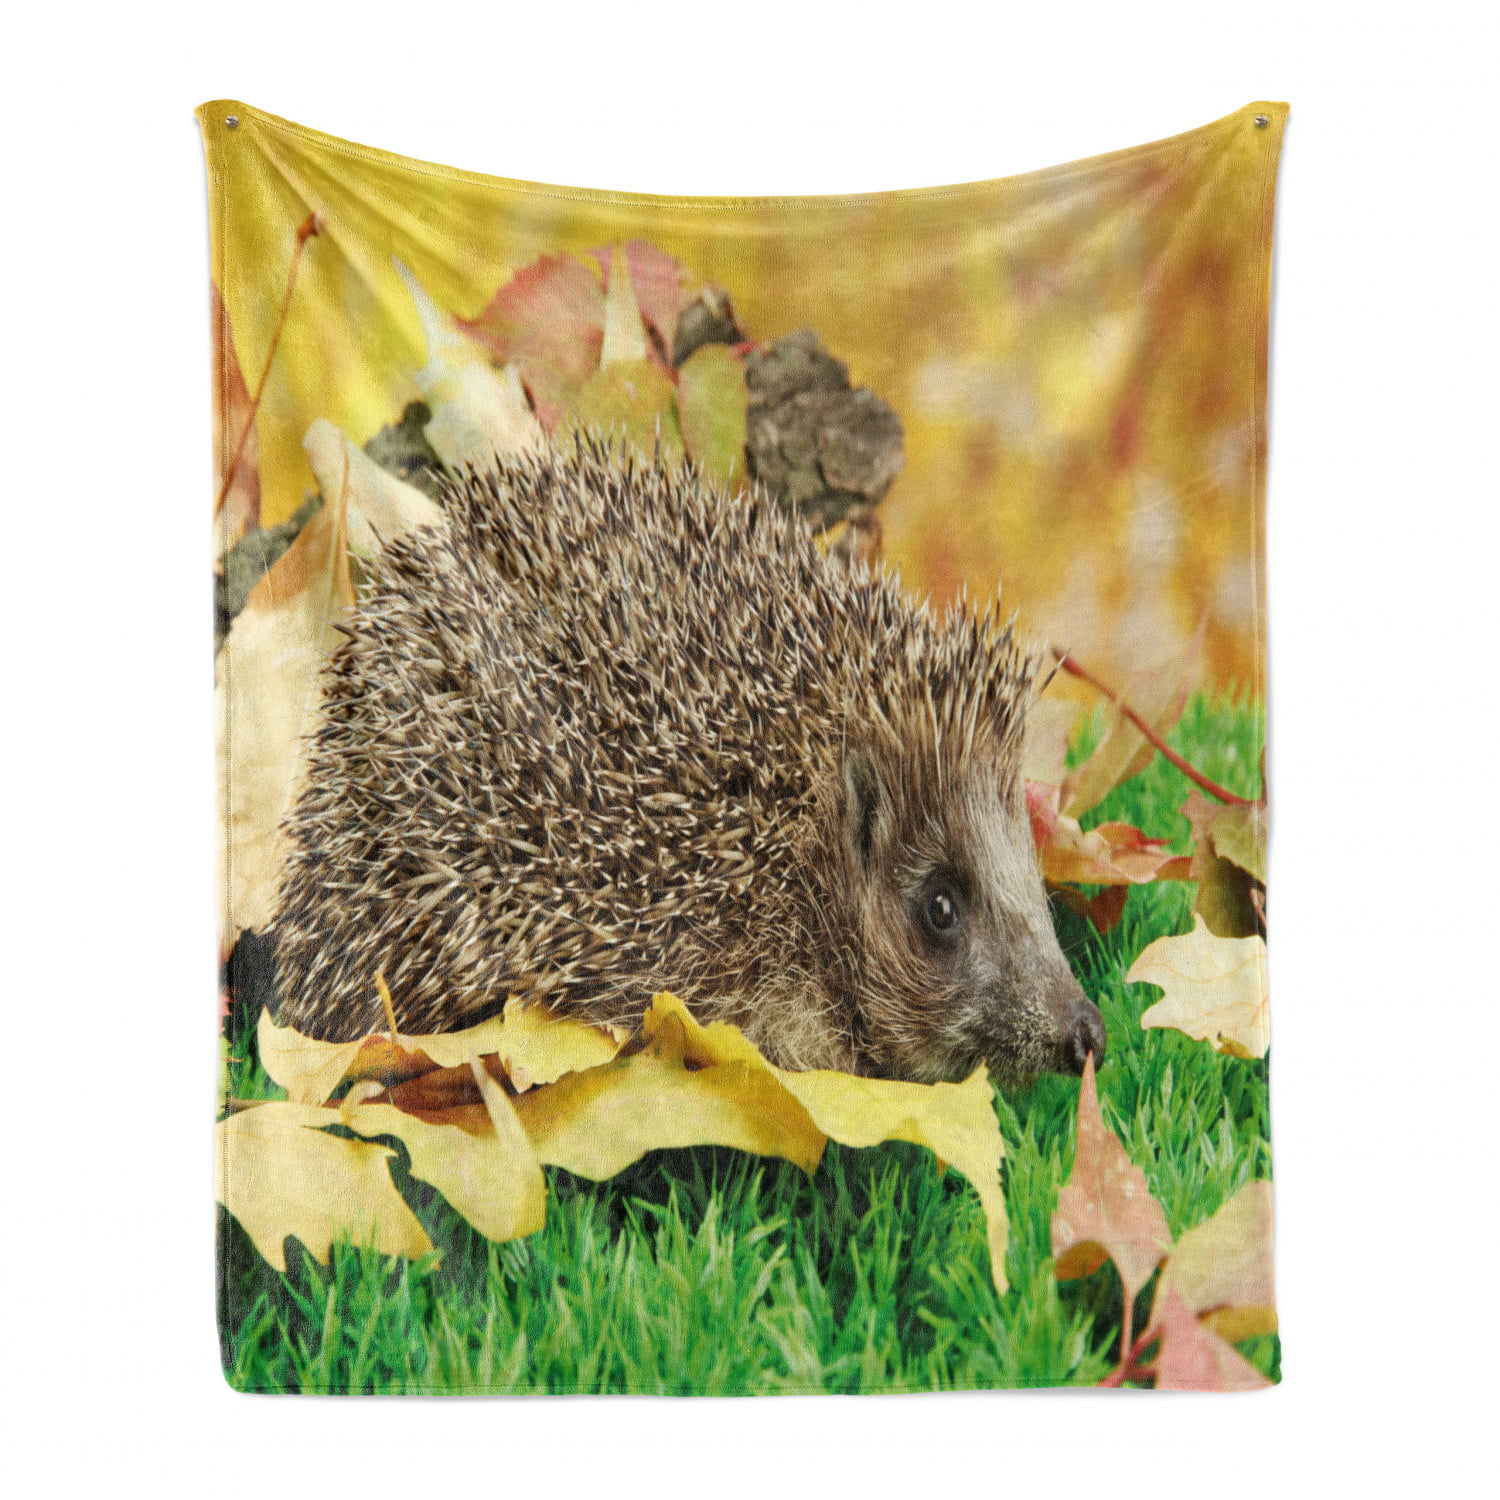 60 x 80 Flannel Fleece Accent Piece Soft Couch Cover for Adults Multicolor Ambesonne Hedgehog Throw Blanket Various Autumn Leaves from Different Trees Animals Carrying Nuts Nature Inspired